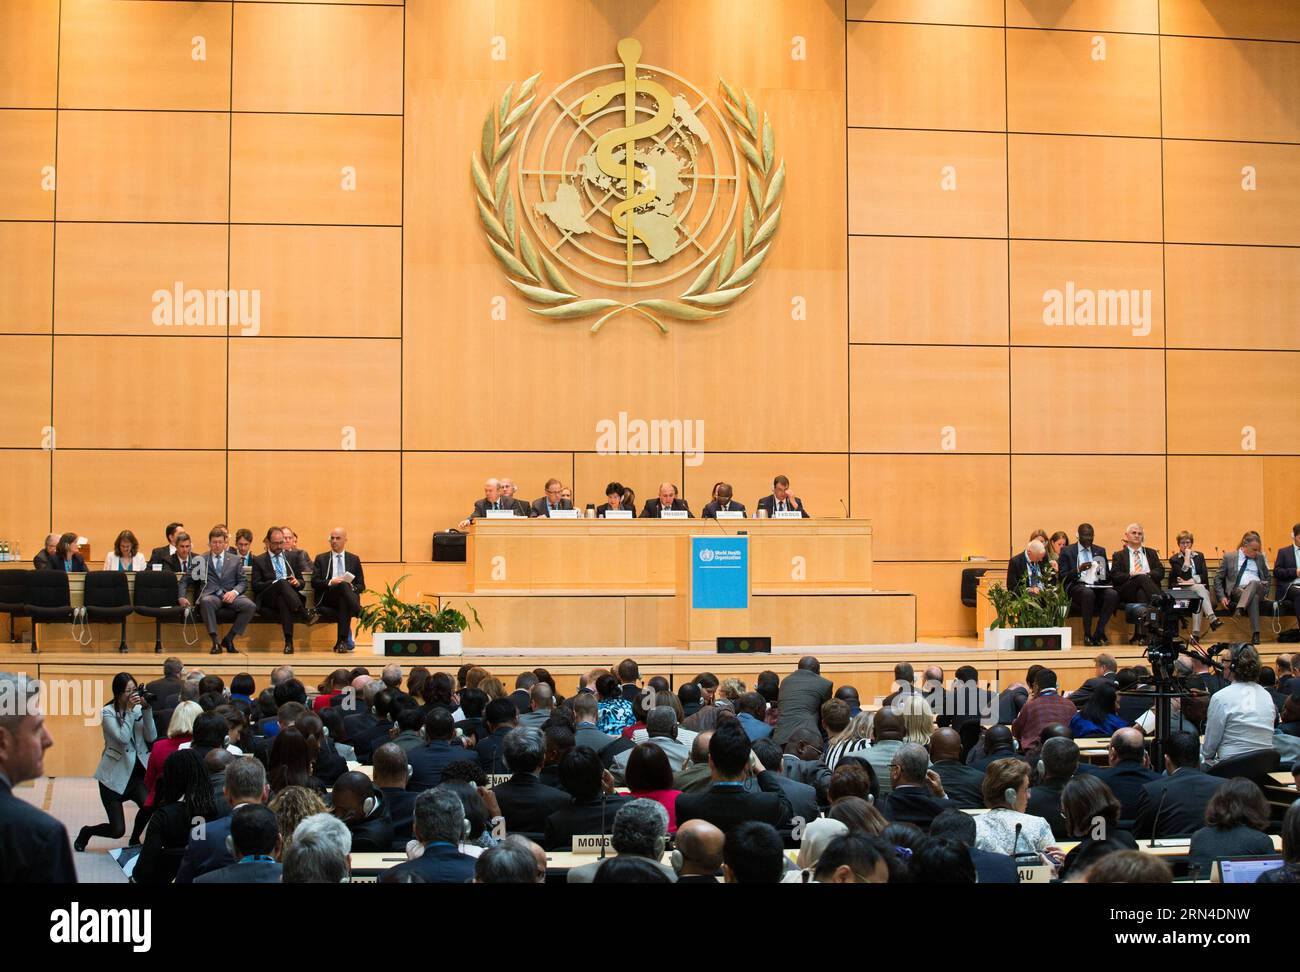 POLITIK WHO-Jahresversammlung in Genf (150518) -- GENEVA, May 18, 2015 -- Photo taken on May 18, 2015 shows a view of the 68th session of the World Health Assembly (WHA) in Geneva, Switzerland. The 68th session of the WHA on Monday kicked off here, over 3,000 delegates from 194 member states would focus on the discussion of Ebola outbreaks and the post-2015 health agenda. ) SWITZERLAND-GENEVA-WHA-68TH SESSION XuxJinquan PUBLICATIONxNOTxINxCHN   politics Who Annual Meeting in Geneva  Geneva May 18 2015 Photo Taken ON May 18 2015 Shows a View of The 68th Session of The World Health Assembly Wha Stock Photo